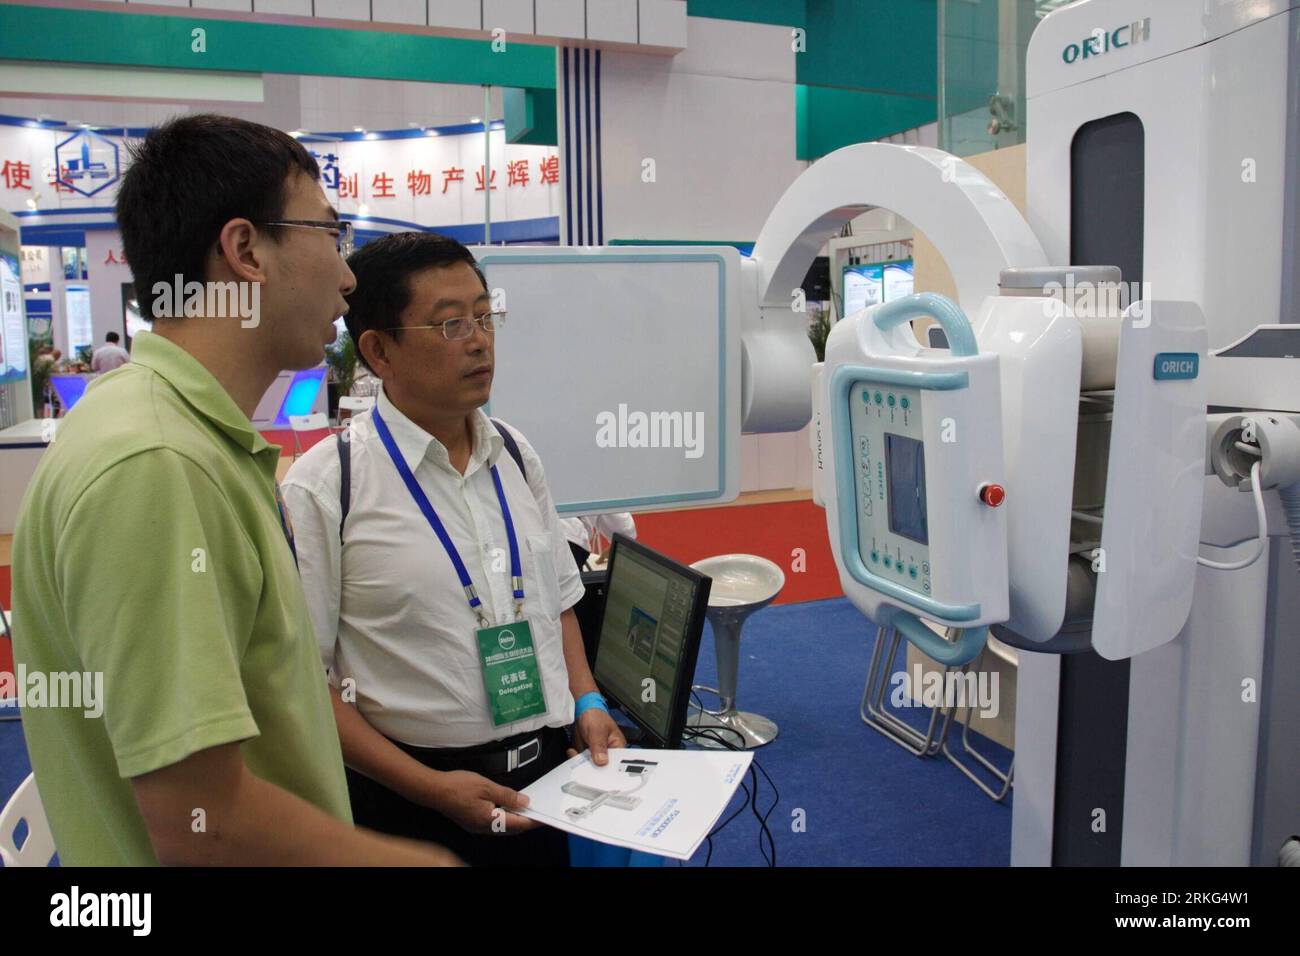 Bildnummer: 55546208  Datum: 26.06.2011  Copyright: imago/Xinhua (110626) -- TIANJIN, June 26, 2011 (Xinhua) -- A company staff (L) briefs a client about a direct digital radiography (DDR) machine, which applies digital X-ray technology, at the BioEco 2011 exhibition held in north China s Tianjin, June 26, 2011. The 4th International Conference for Bioeconomy (BioEco 2011), China s top bioeconomy forum, opened in Tianjin at the Meijiang Conference and Exhibition Center on Sunday. Some 222 Chinese and foreign companies have participated in the 3-day conference, showcasing over 1,000 biotechnolo Stock Photo